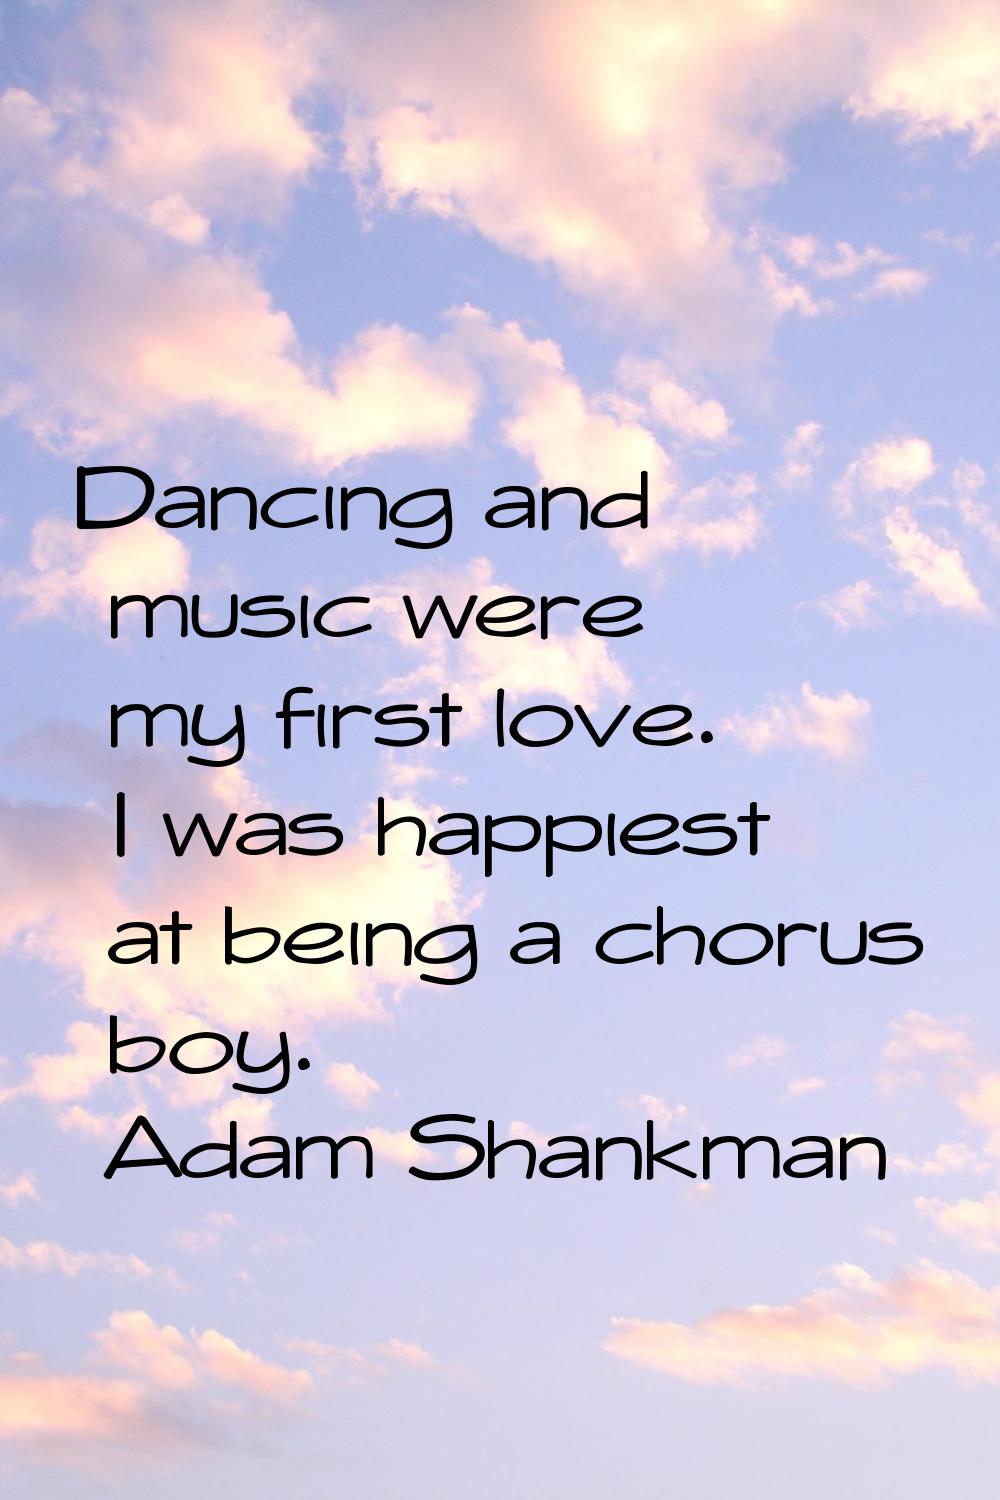 Dancing and music were my first love. I was happiest at being a chorus boy.